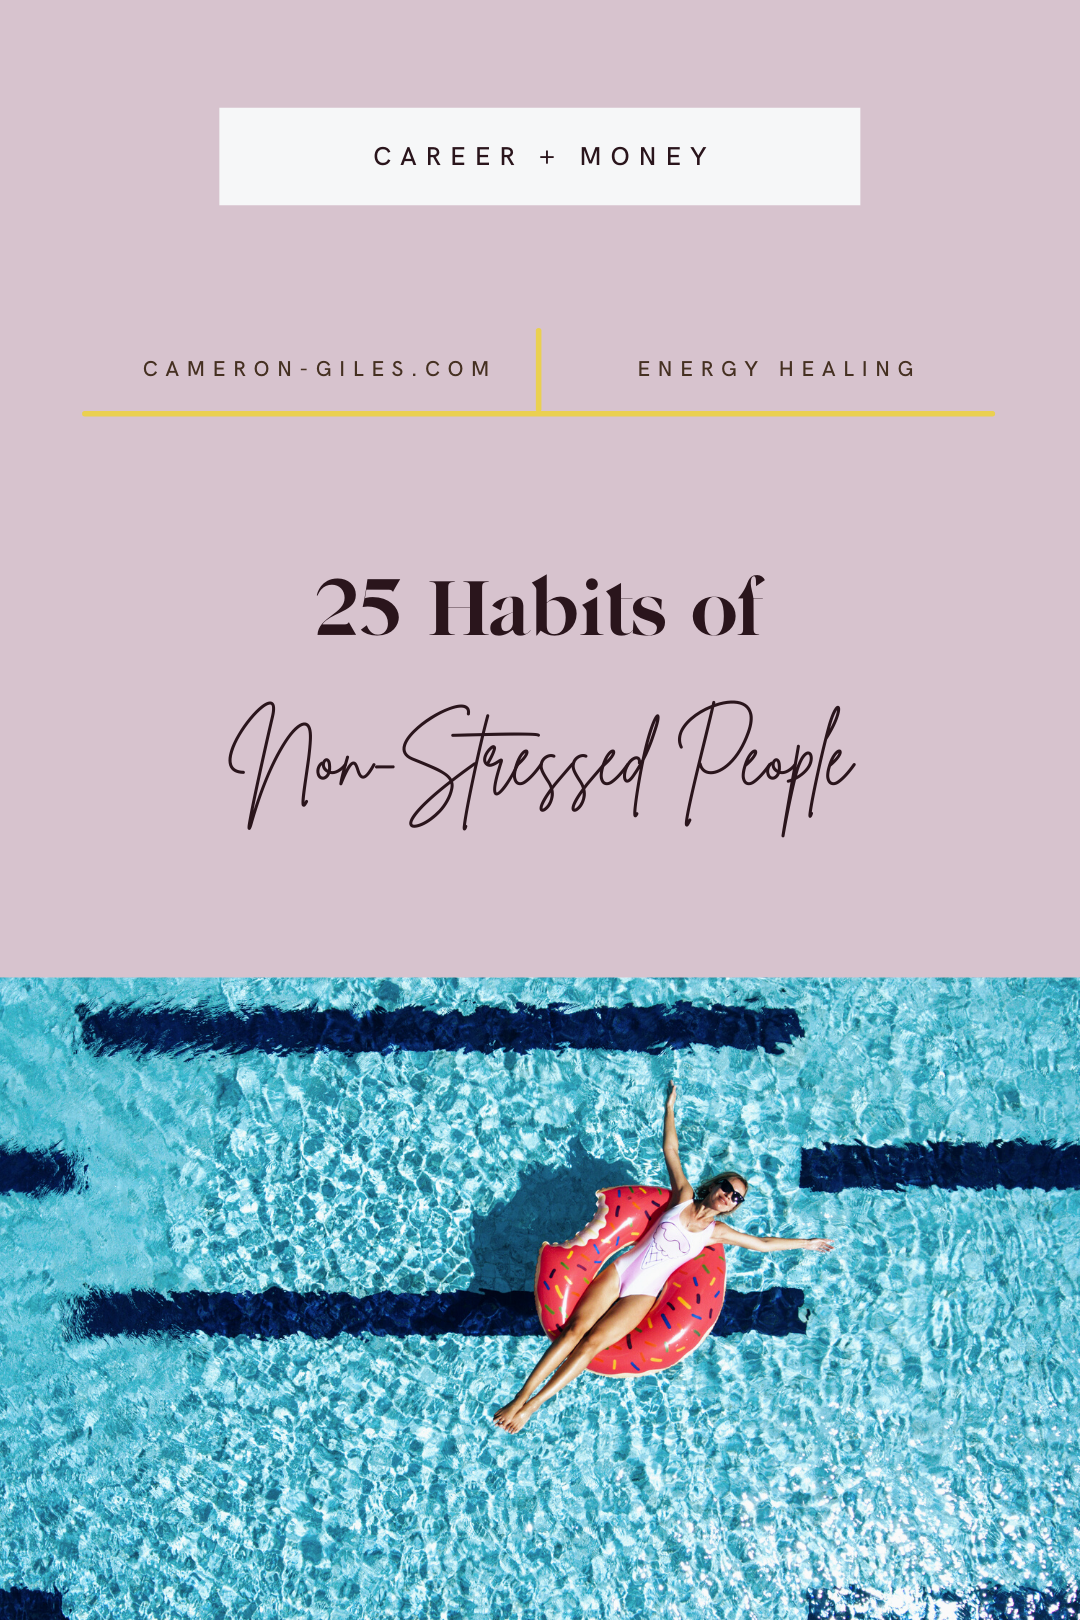 2018/8/8/25-habits-of-non-stressed-people